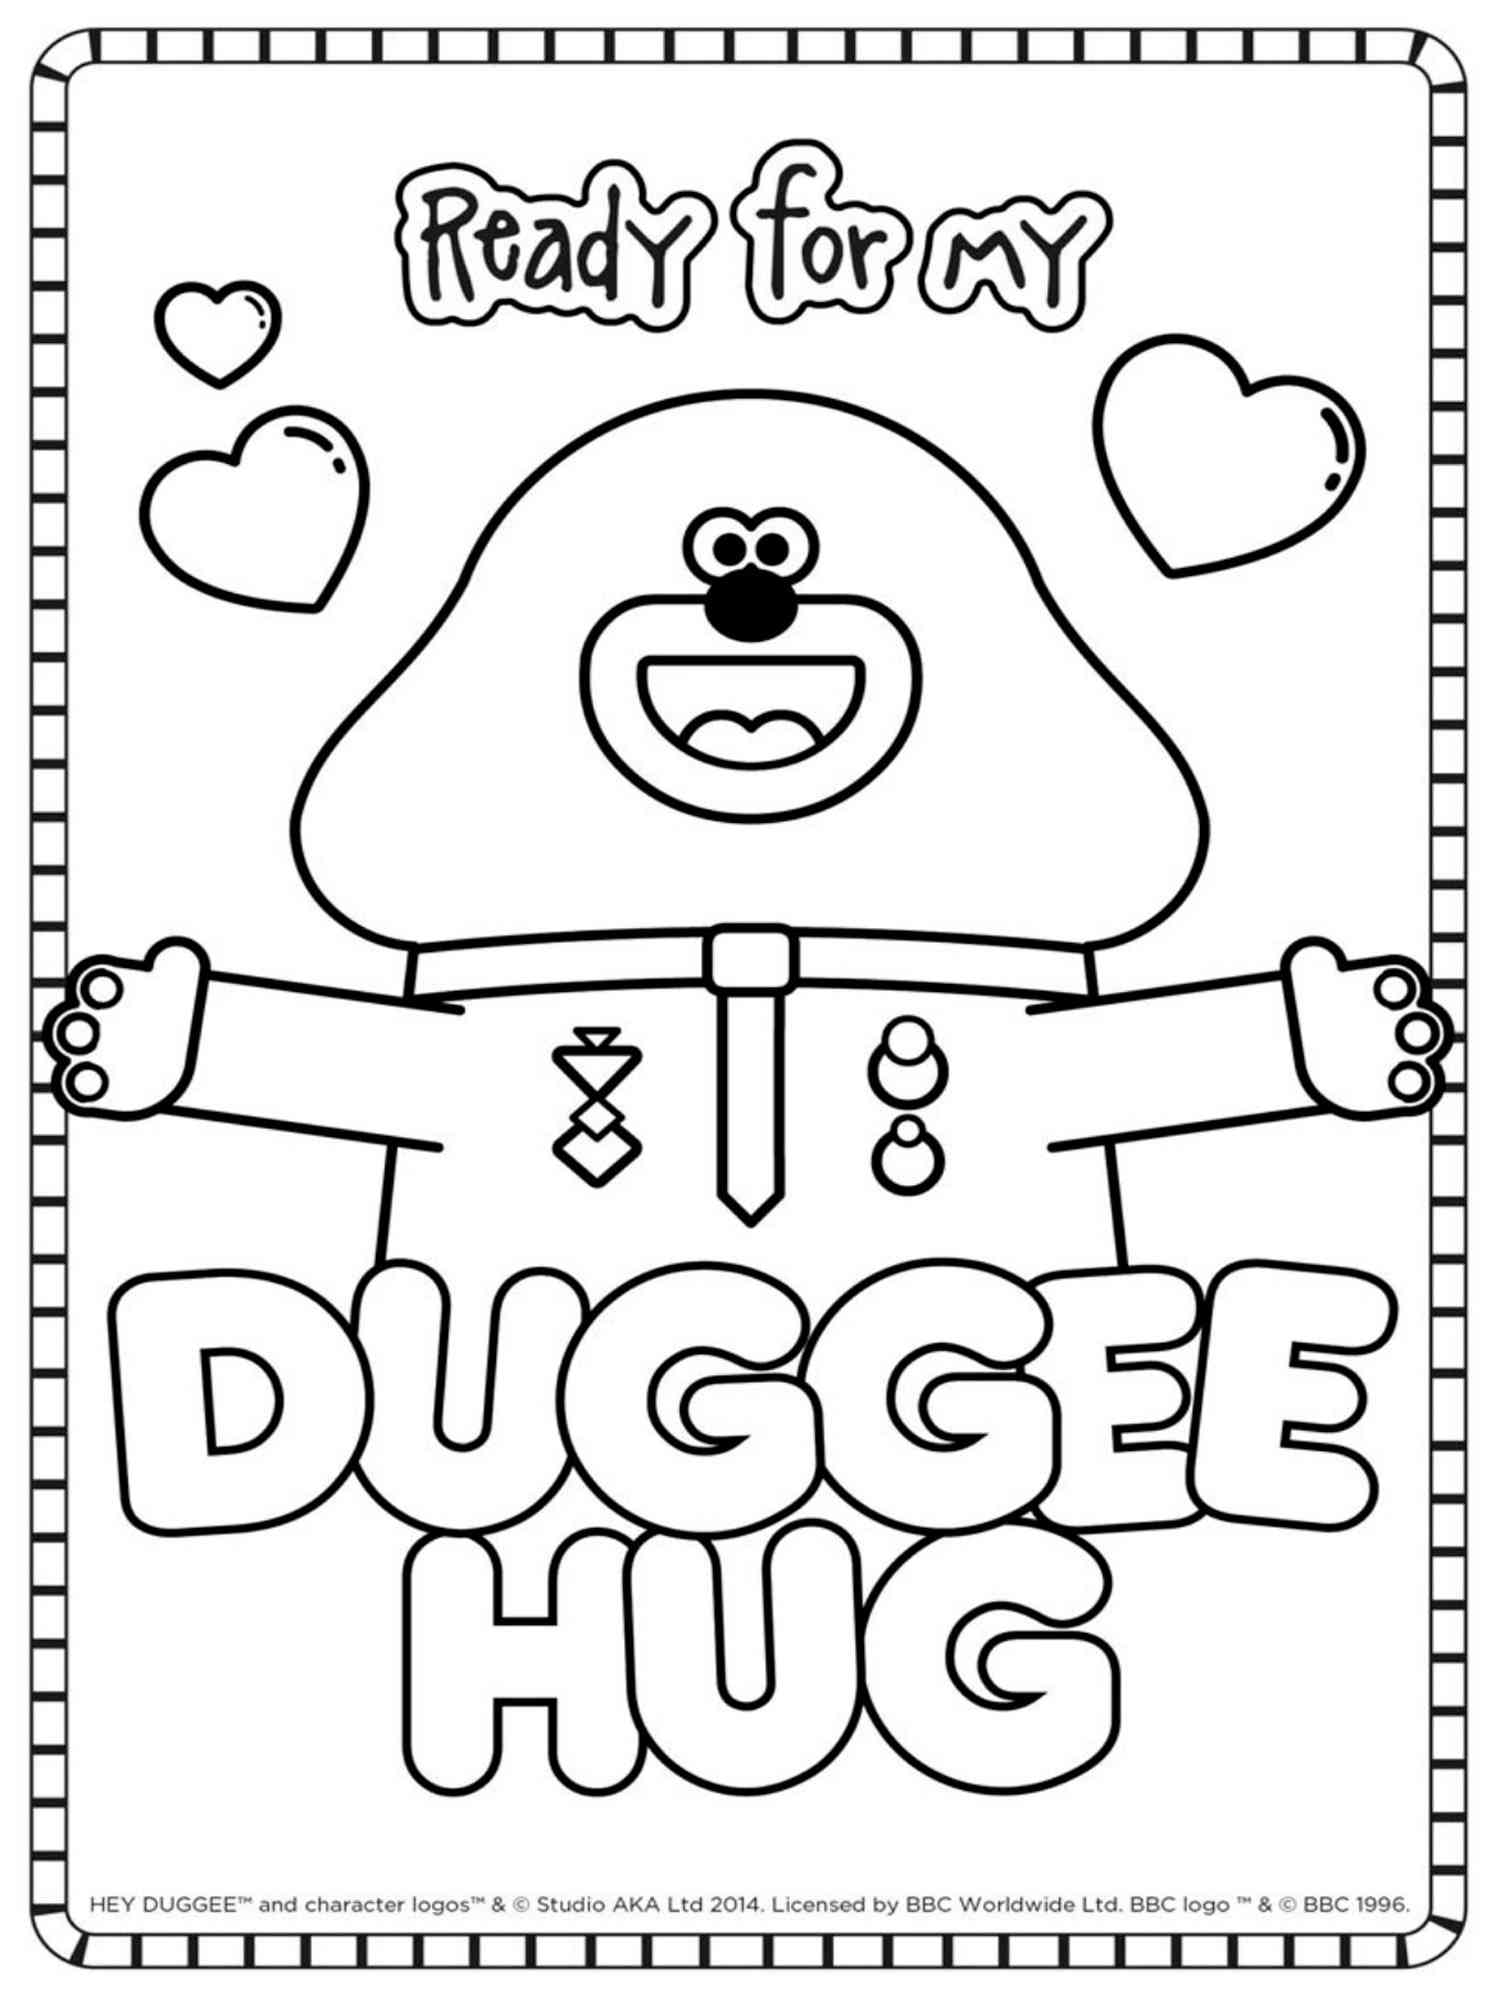 Hey Duggee 4 coloring page